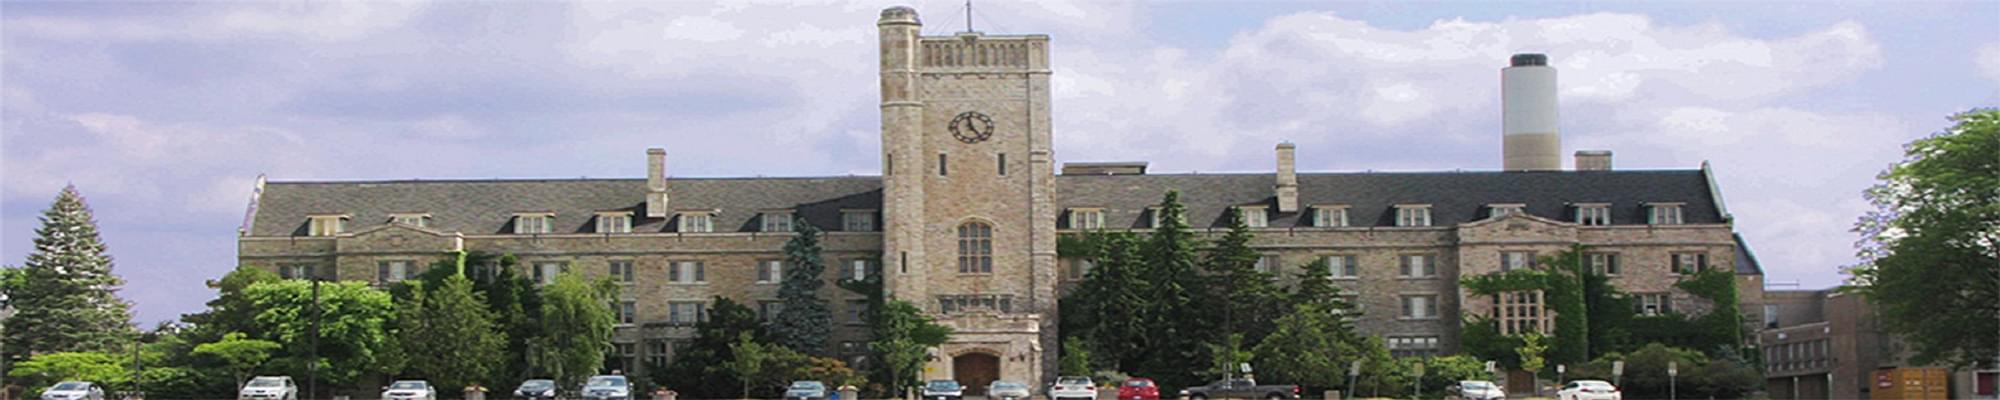 University Of Guelph [UOFG], Guelph Courses, Fees, Ranking, & Admission  Criteria